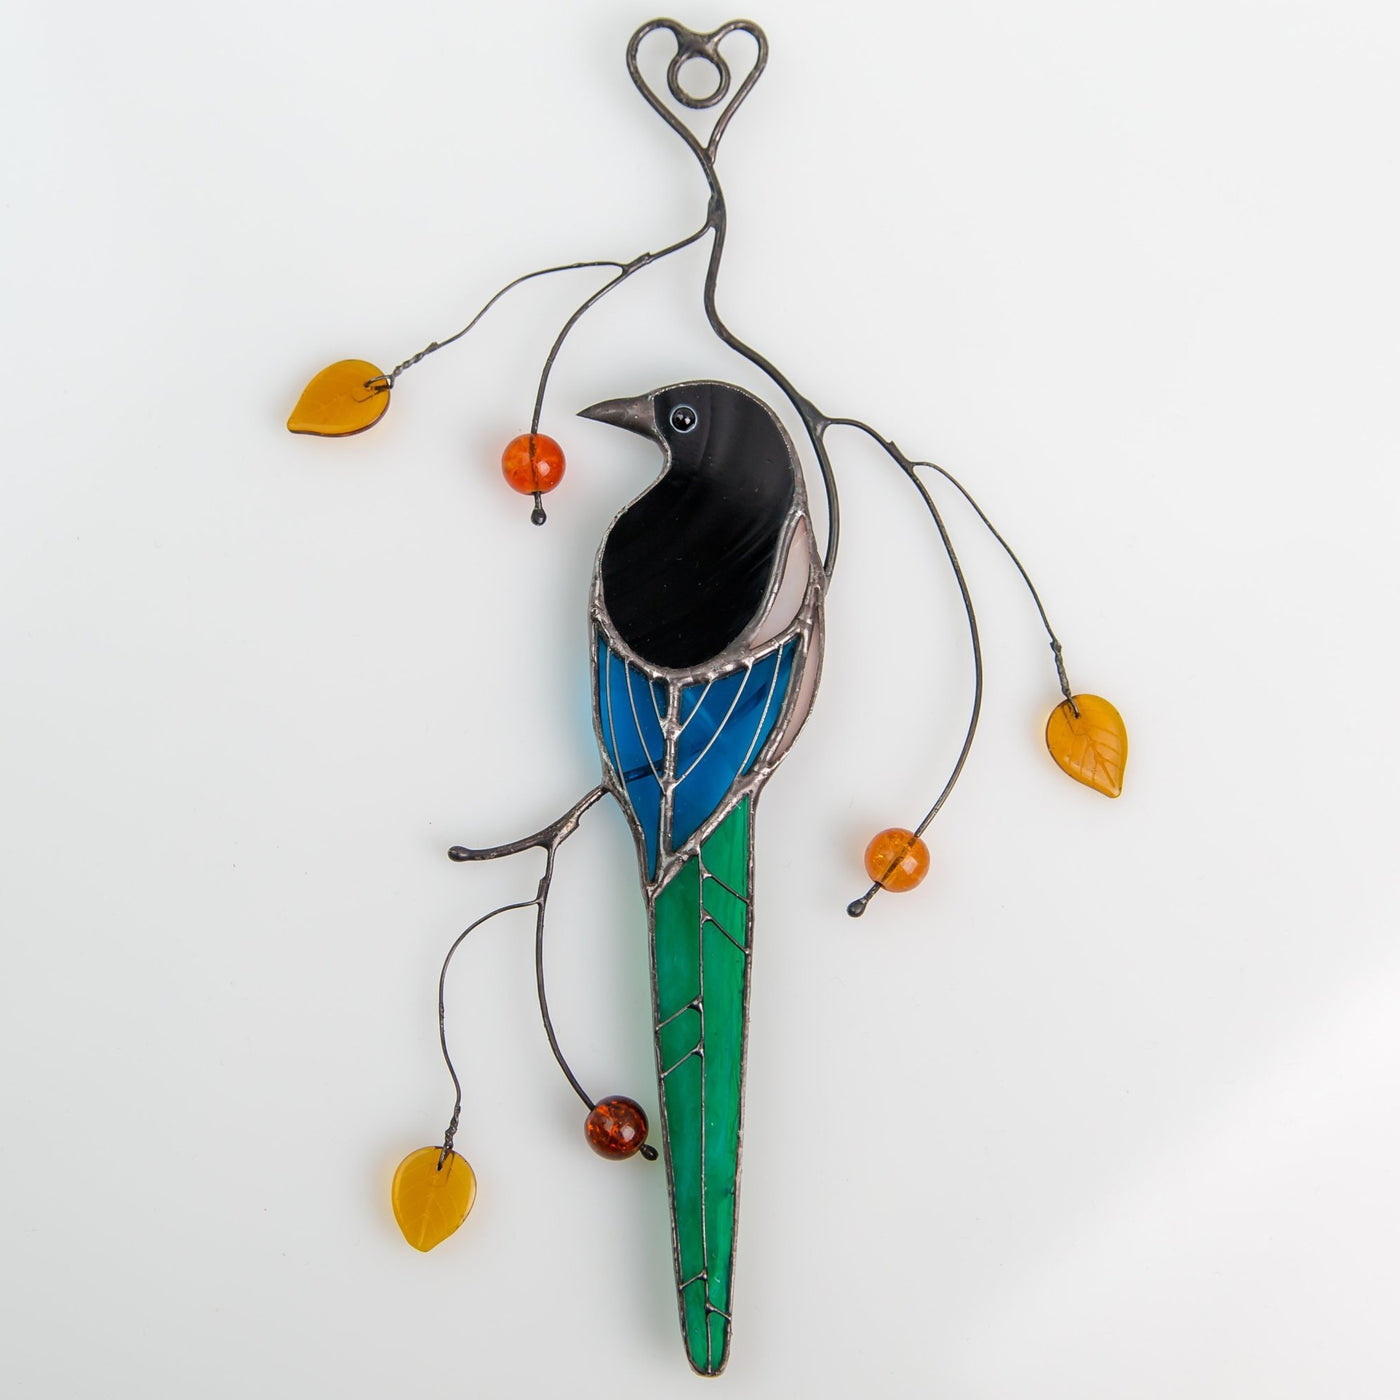 Back view stained glass magpie son the branch suncatcher